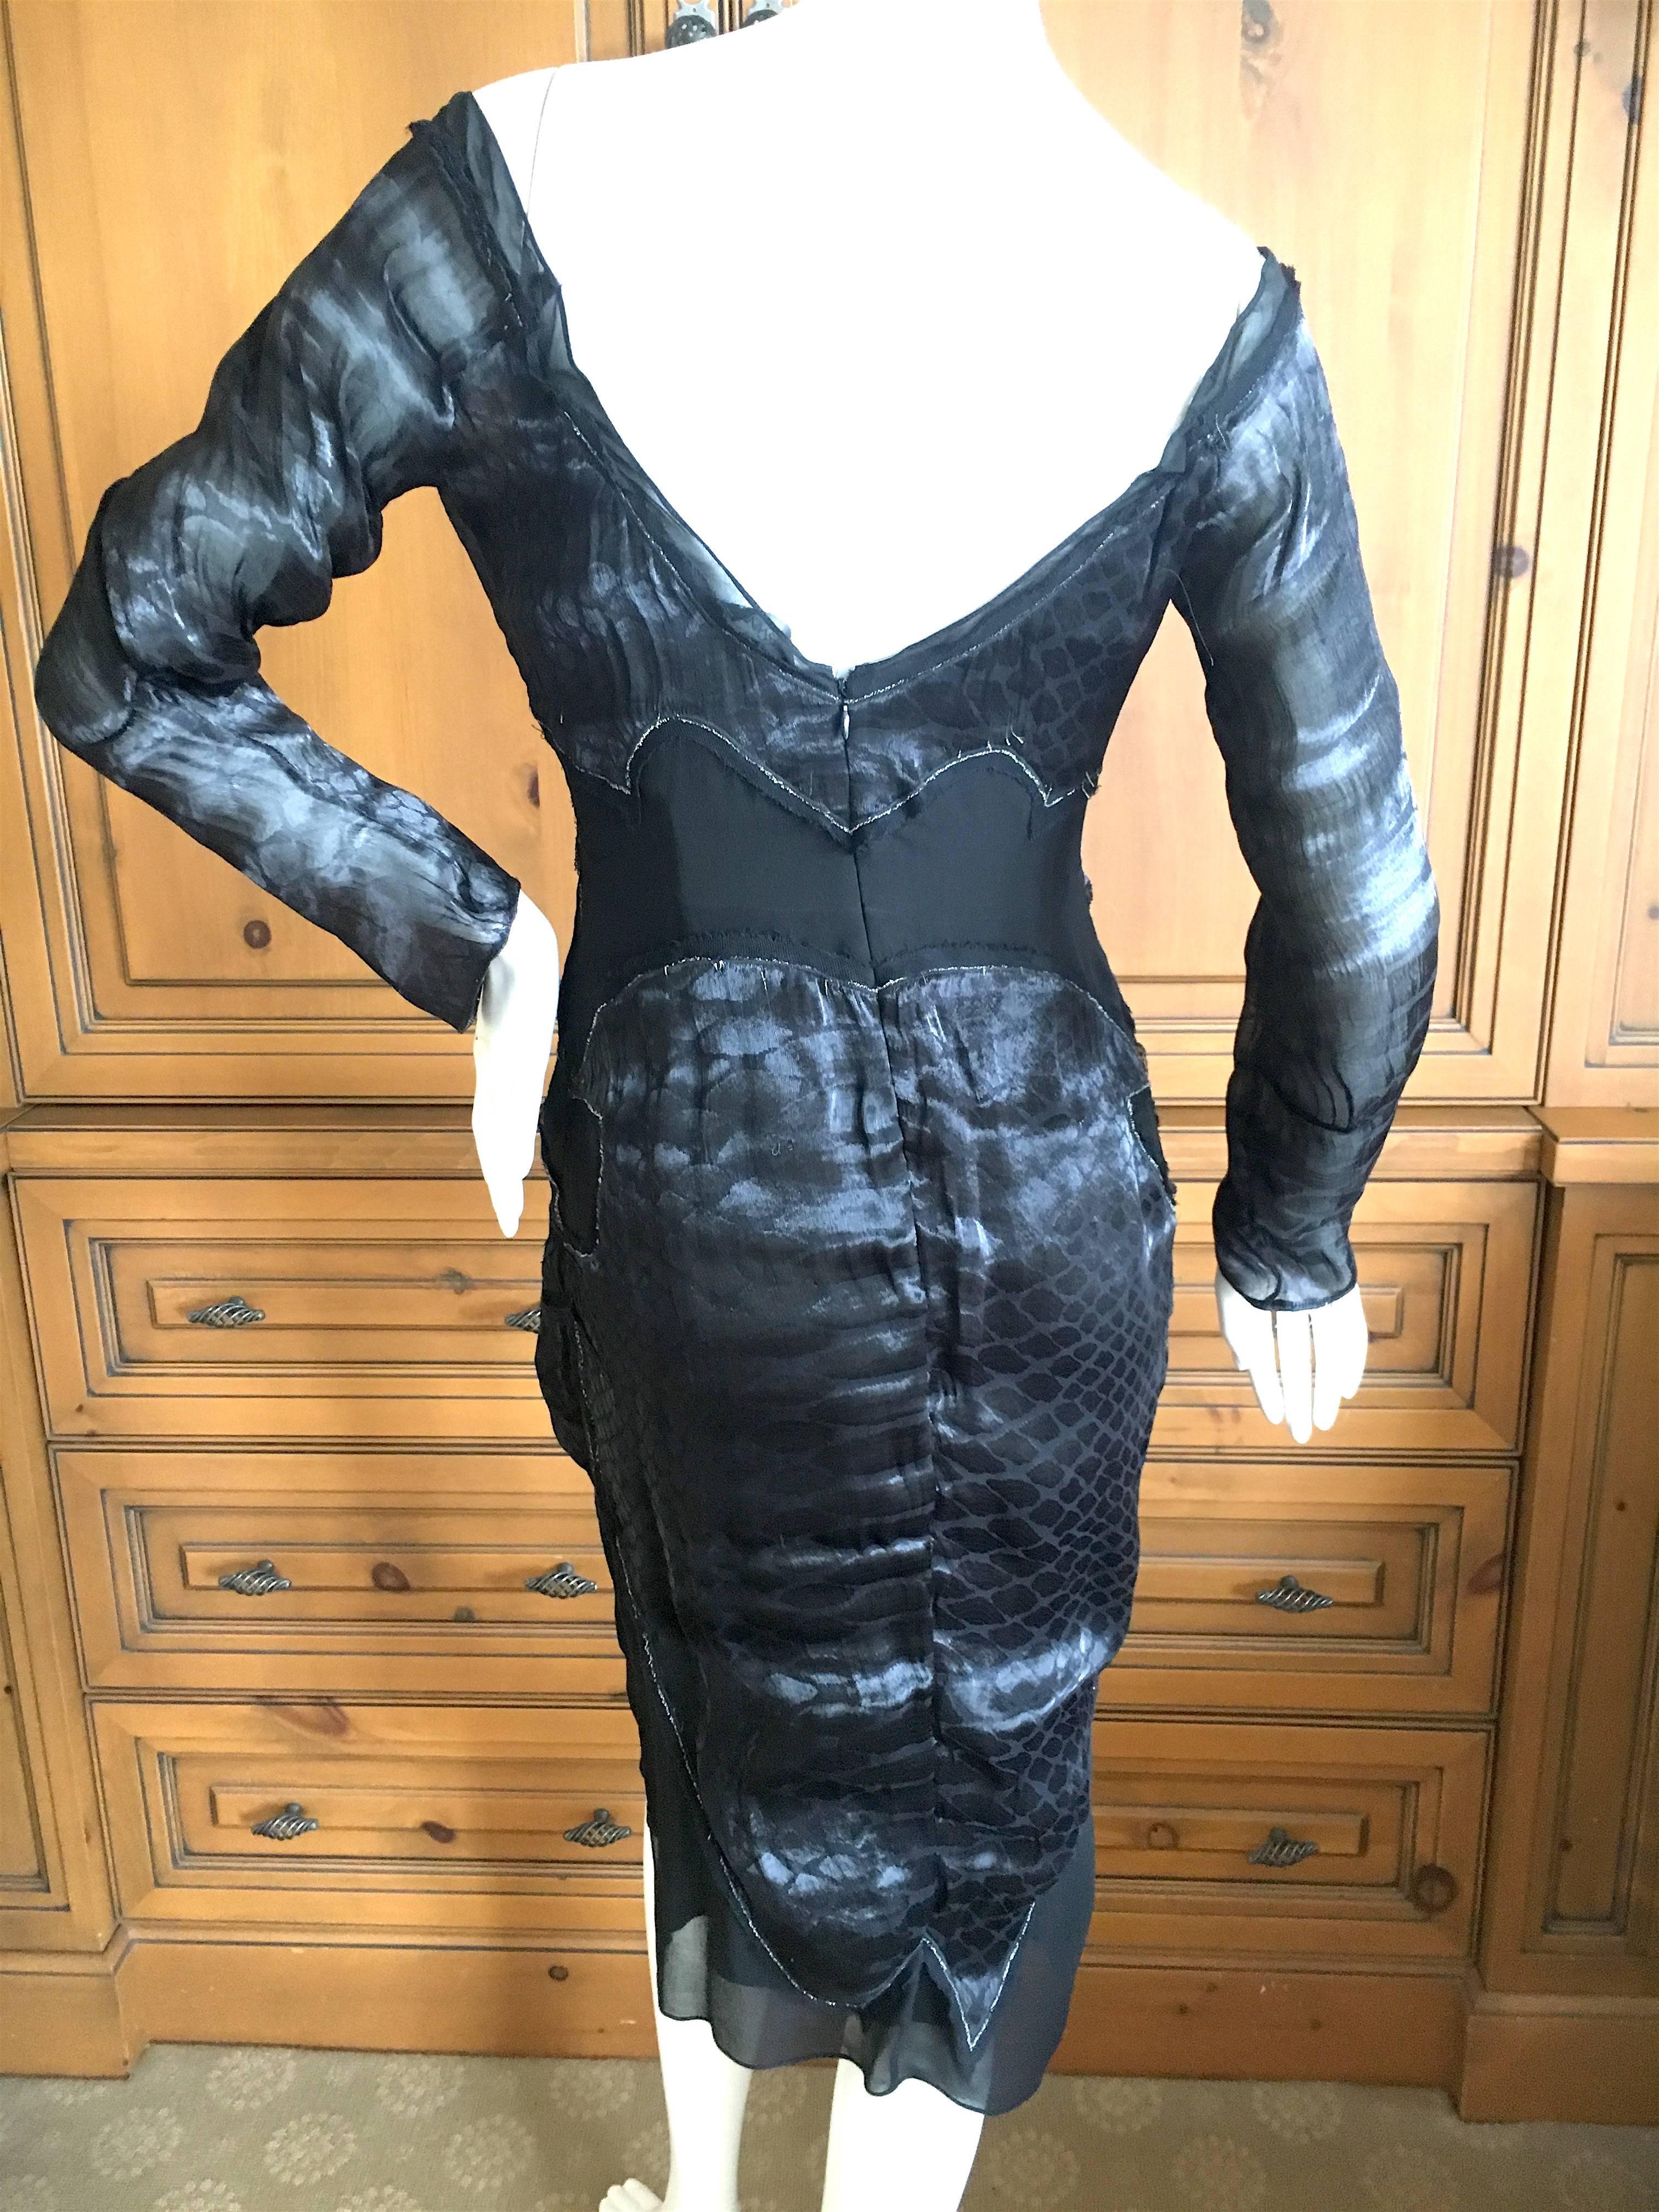 Yves Saint Laurent by Tom Ford Reptile Print Black Dress Fall 2004 For Sale 2